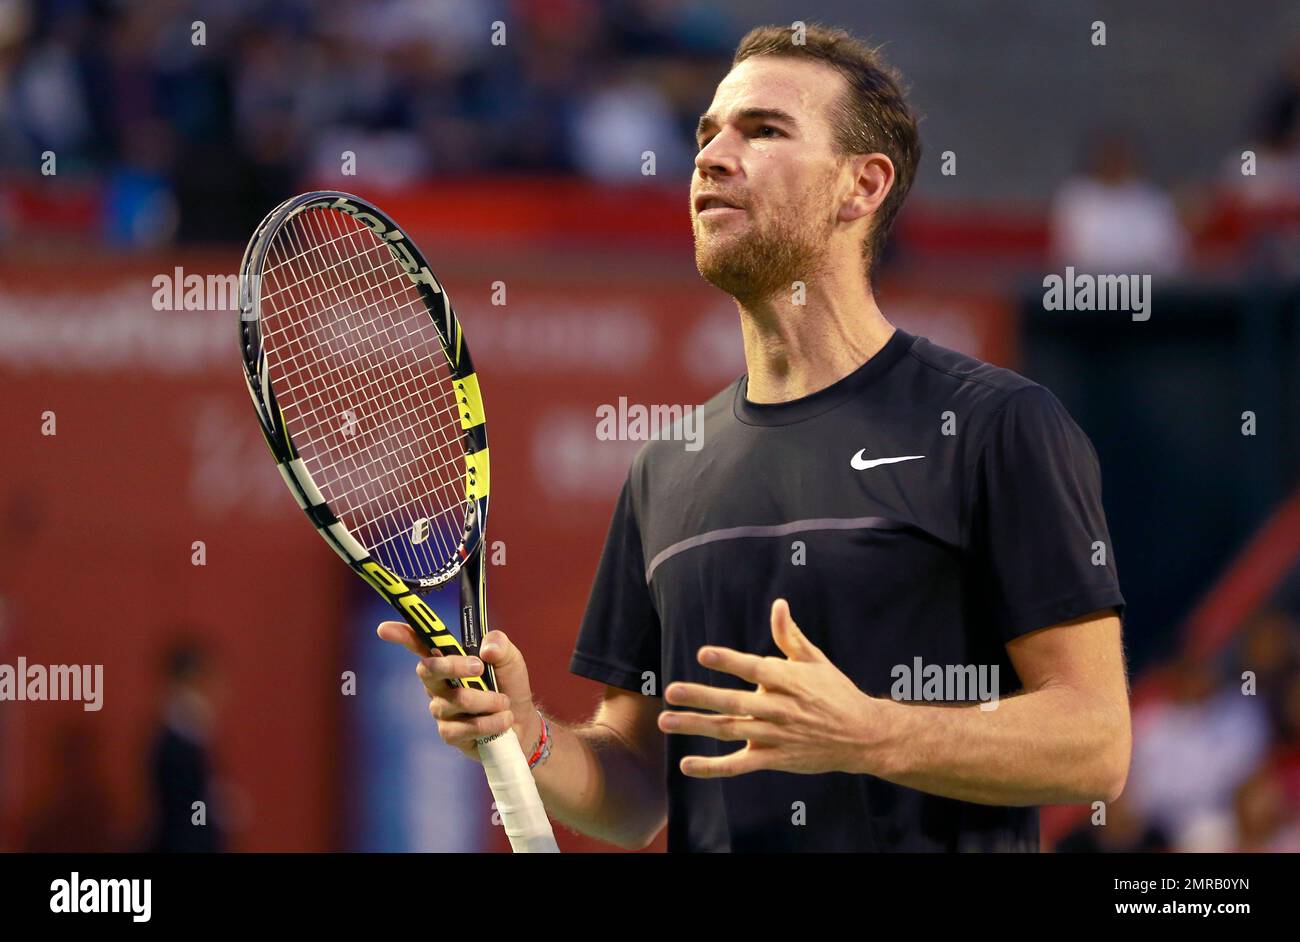 Adrian Mannarino of France reacts after losing a point David Goffin of  Belgium during their men's singles final match of the Japan Open tennis  tournament in Tokyo, Sunday, Oct. 8, 2017. (AP